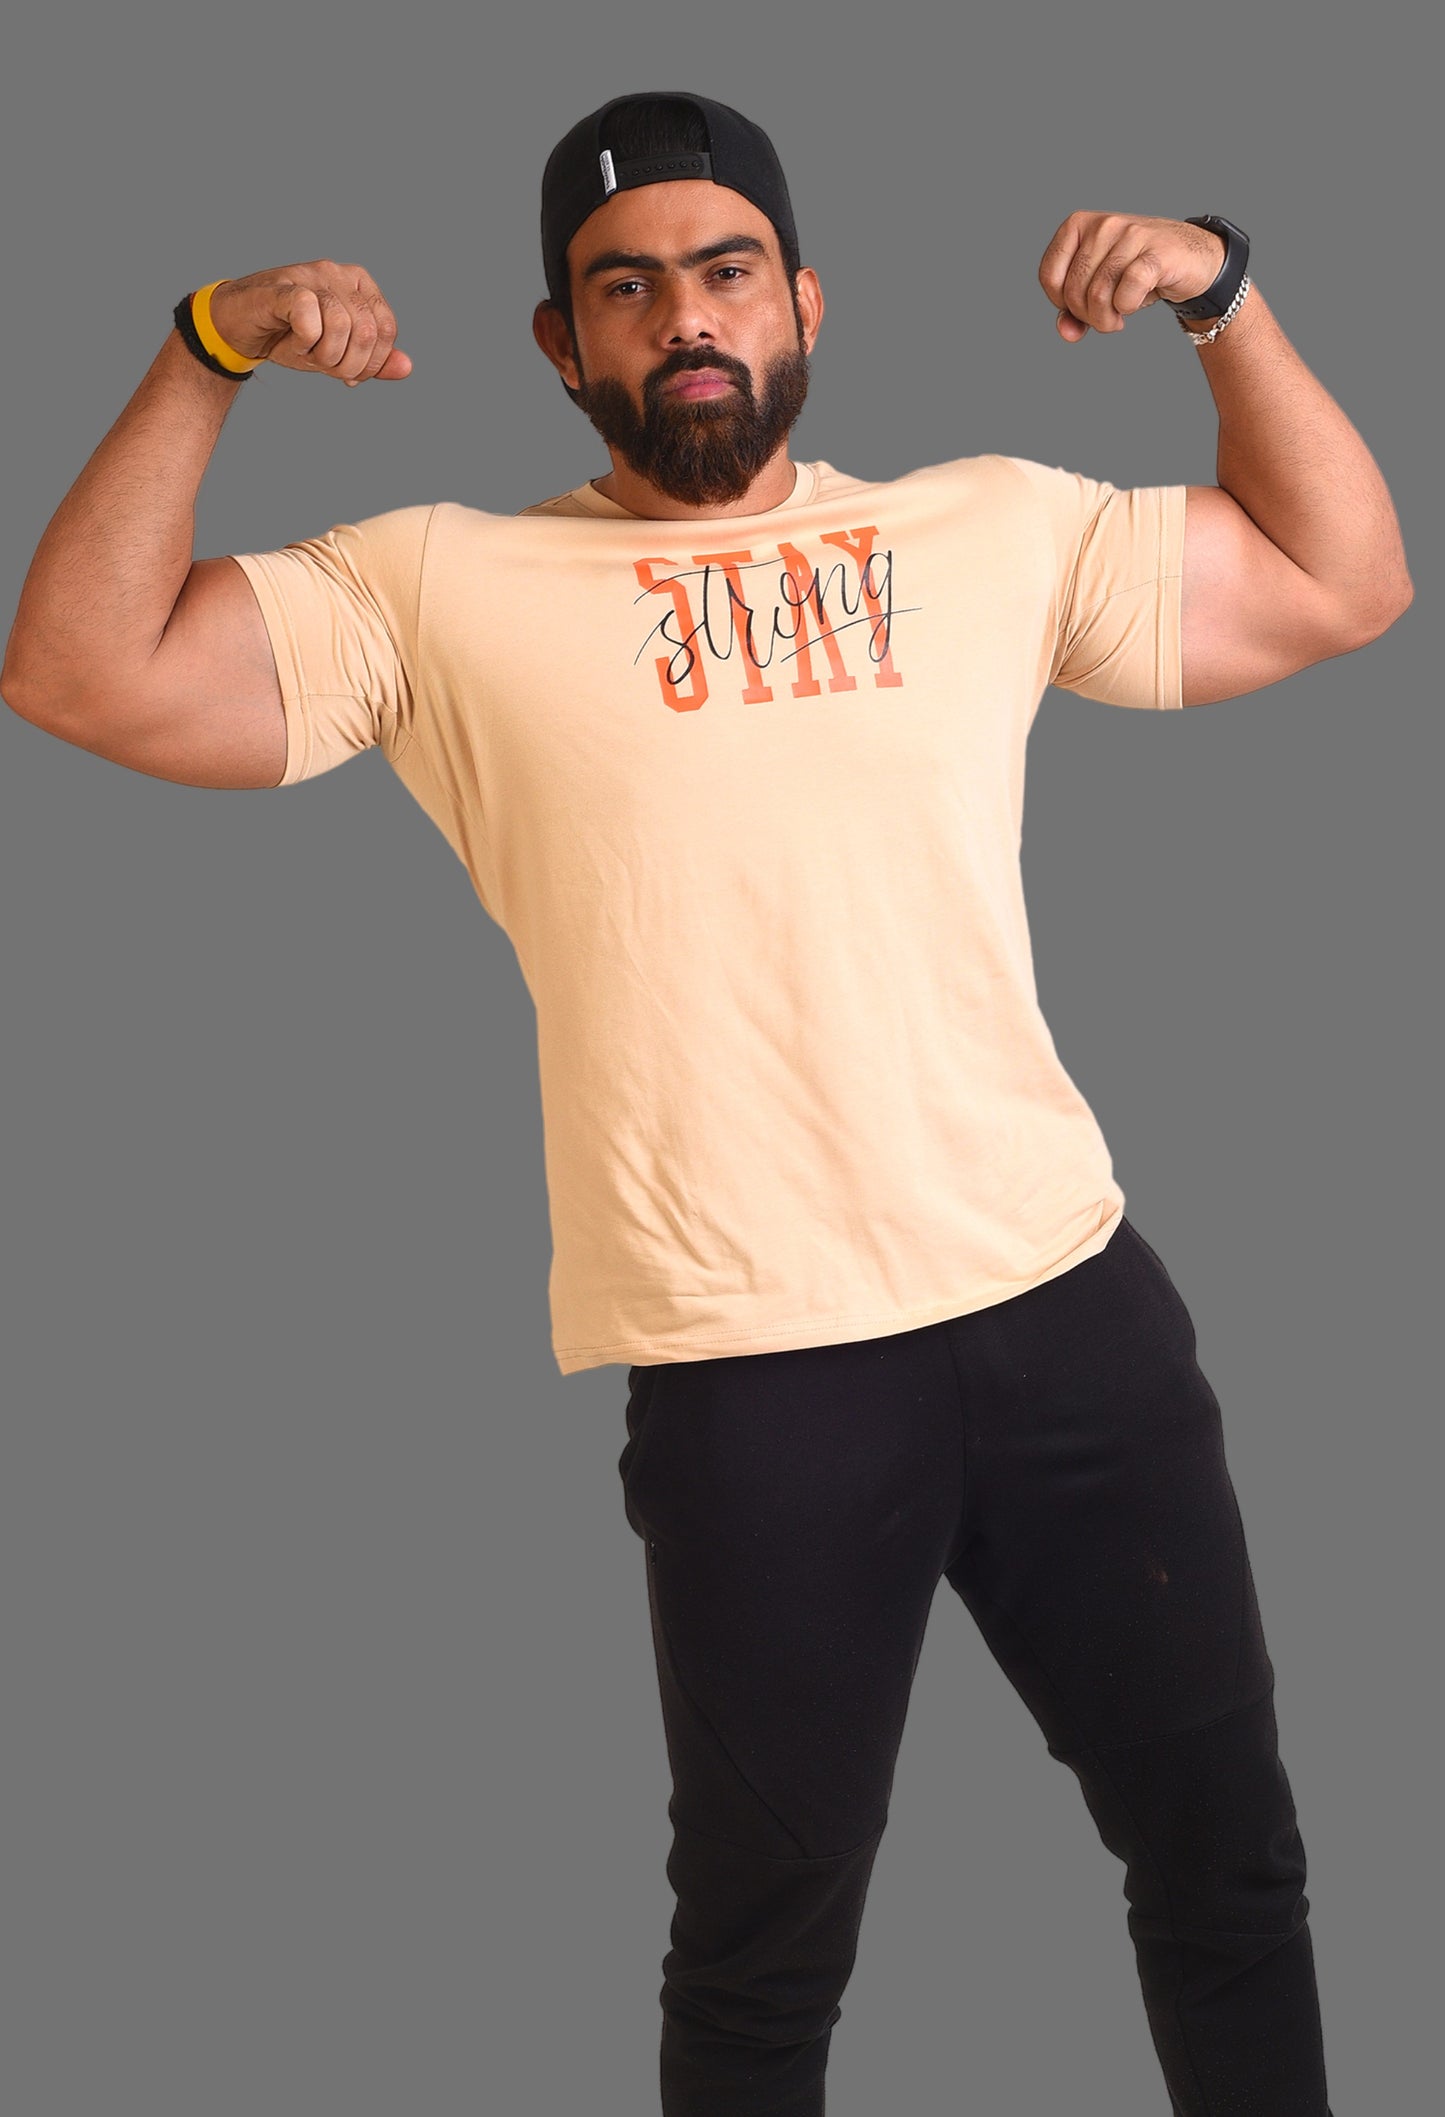 Gym T Shirt - Stay Strong - Strong Soul - Sports T Shirt